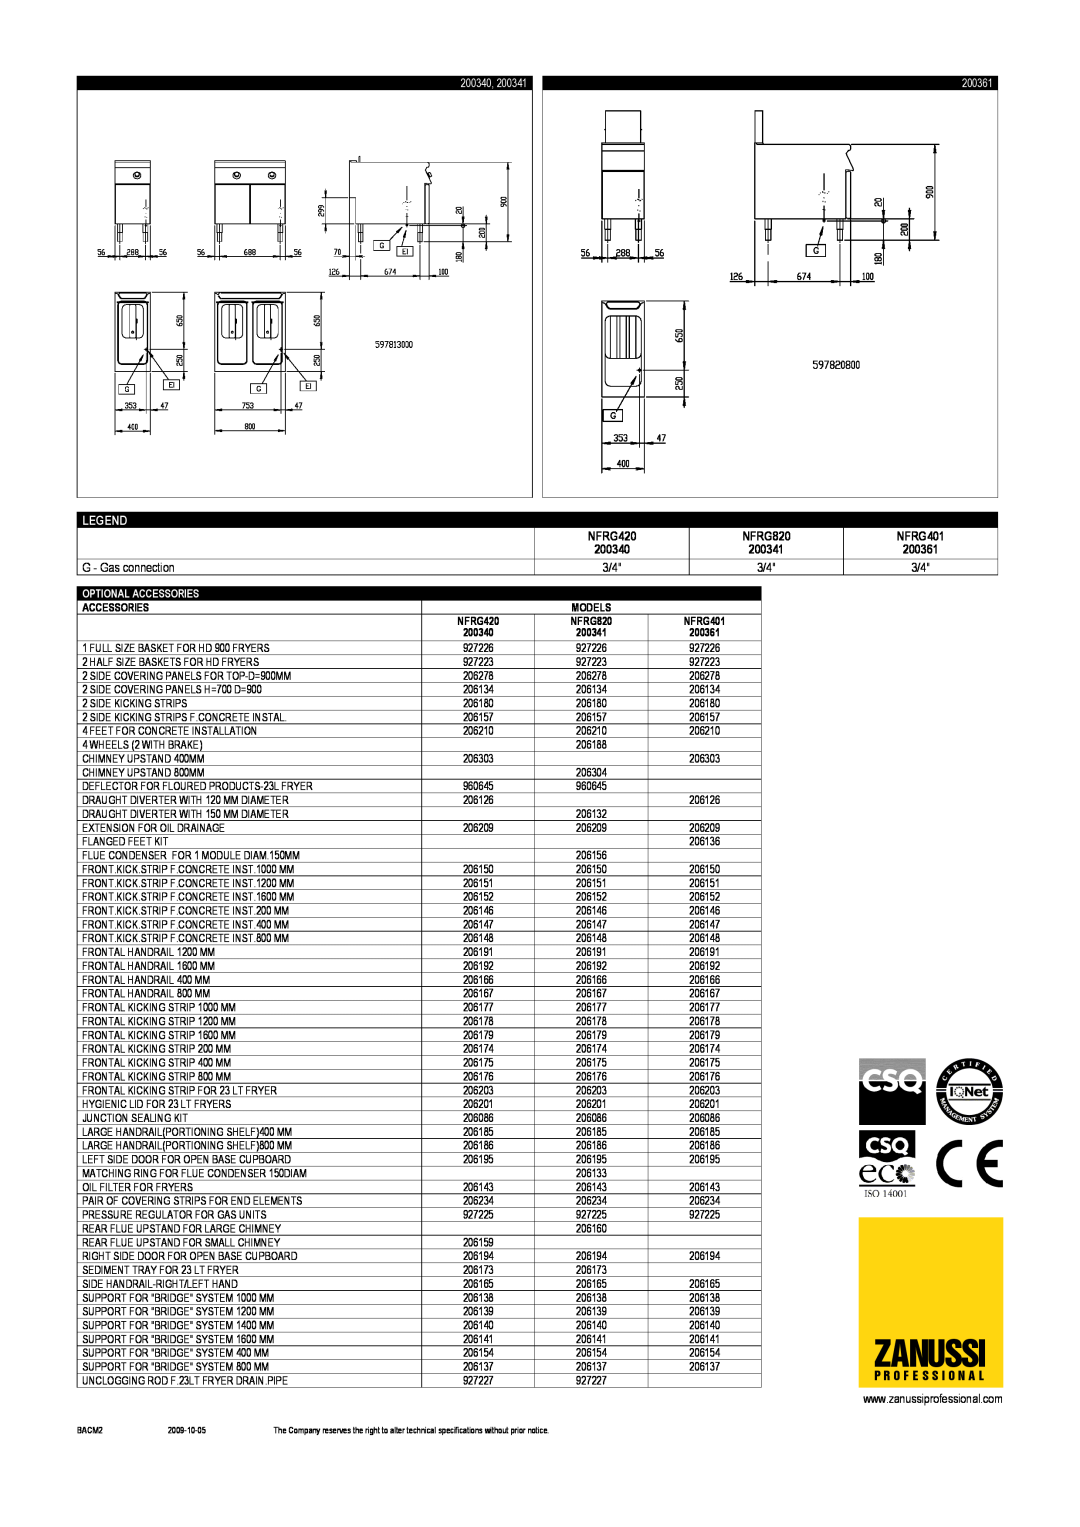 Zanussi NFRG820 Zanussi, G - Gas connection, NFRG420, NFRG401, 200340, 200341, 200361, P R O F E S S I O N A L, Models 